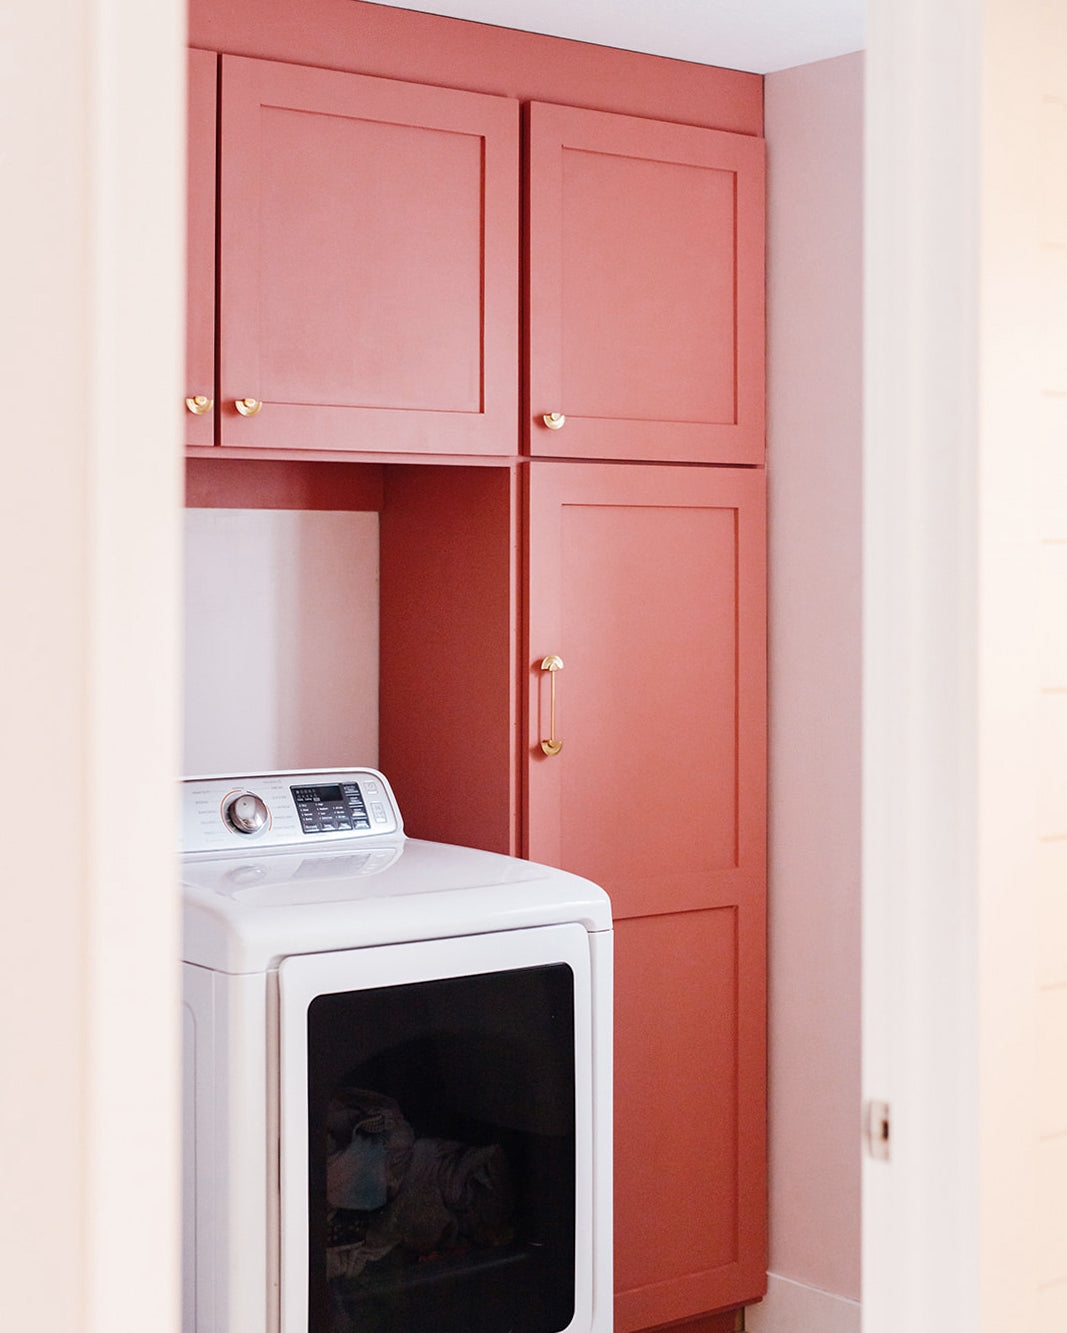 Creative paint ideas to inspire your next paint project. Try a vibrant color for your laundry room cabinets like these painted in Pink Sky.